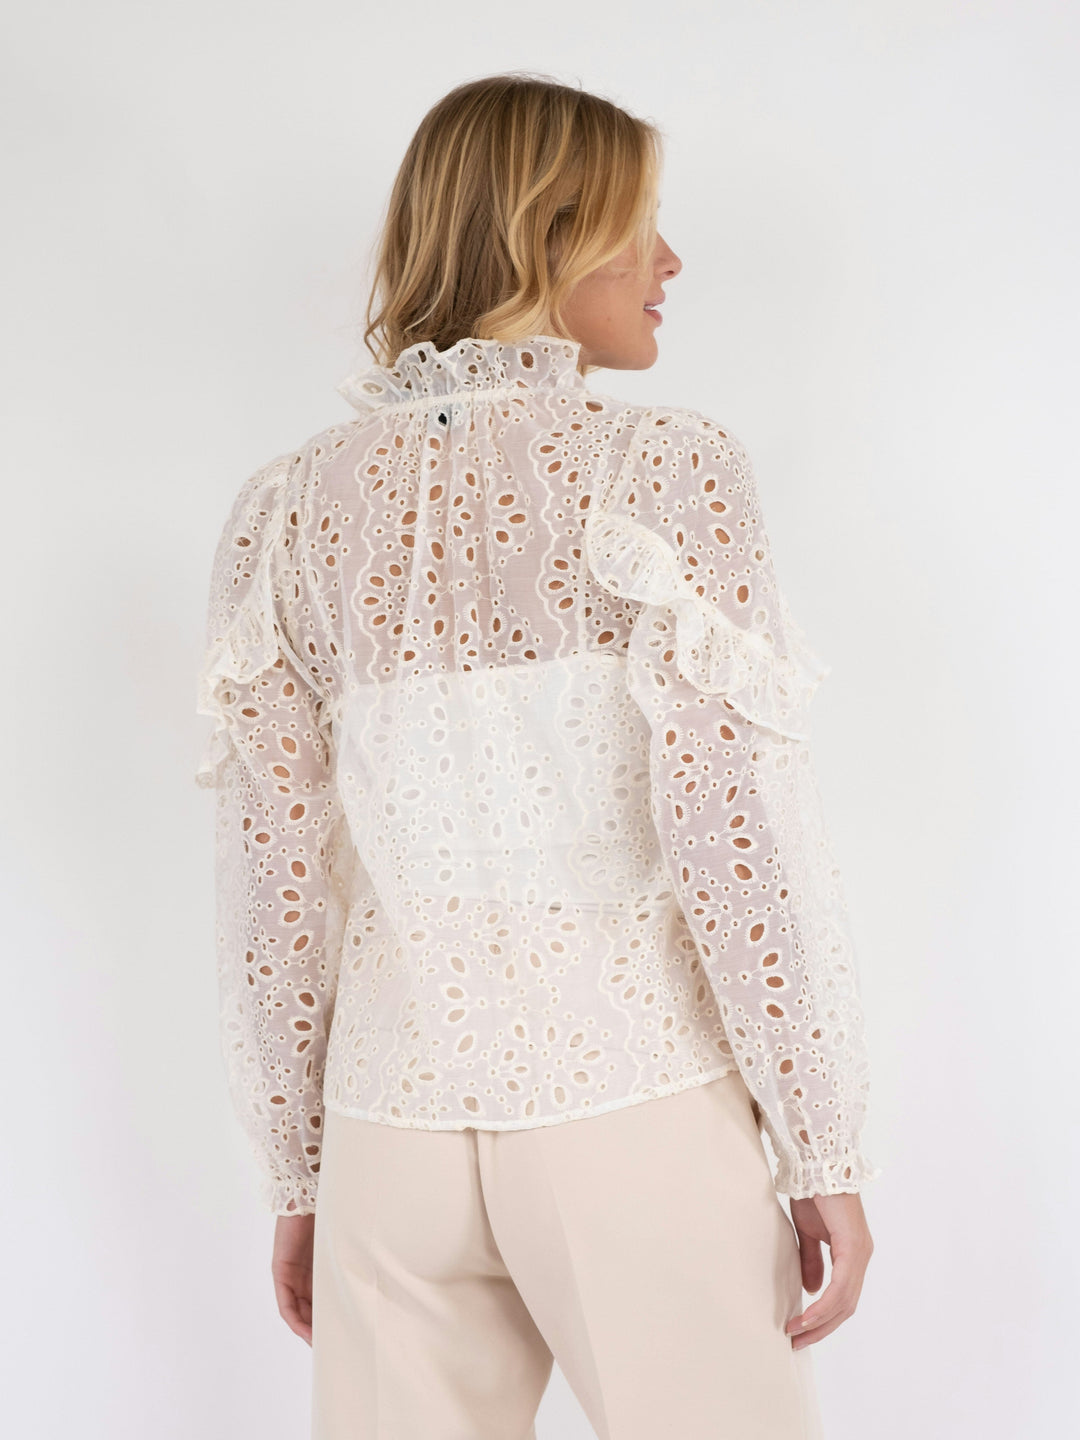 Neo Noir - Nadira Embroidery Blouse - Ivory